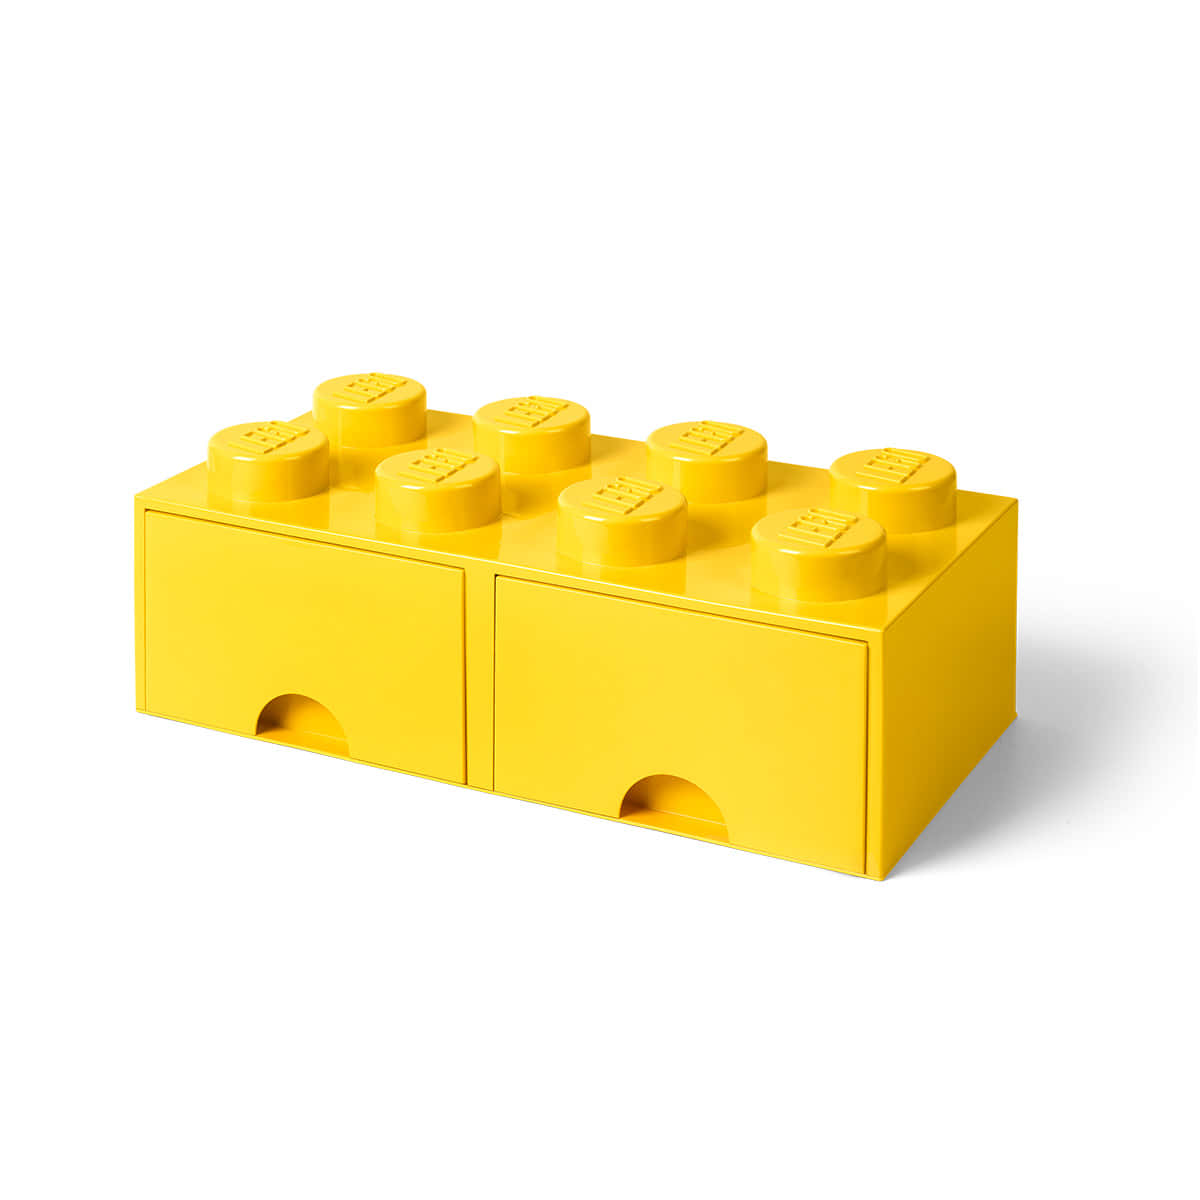 Lego Pictures